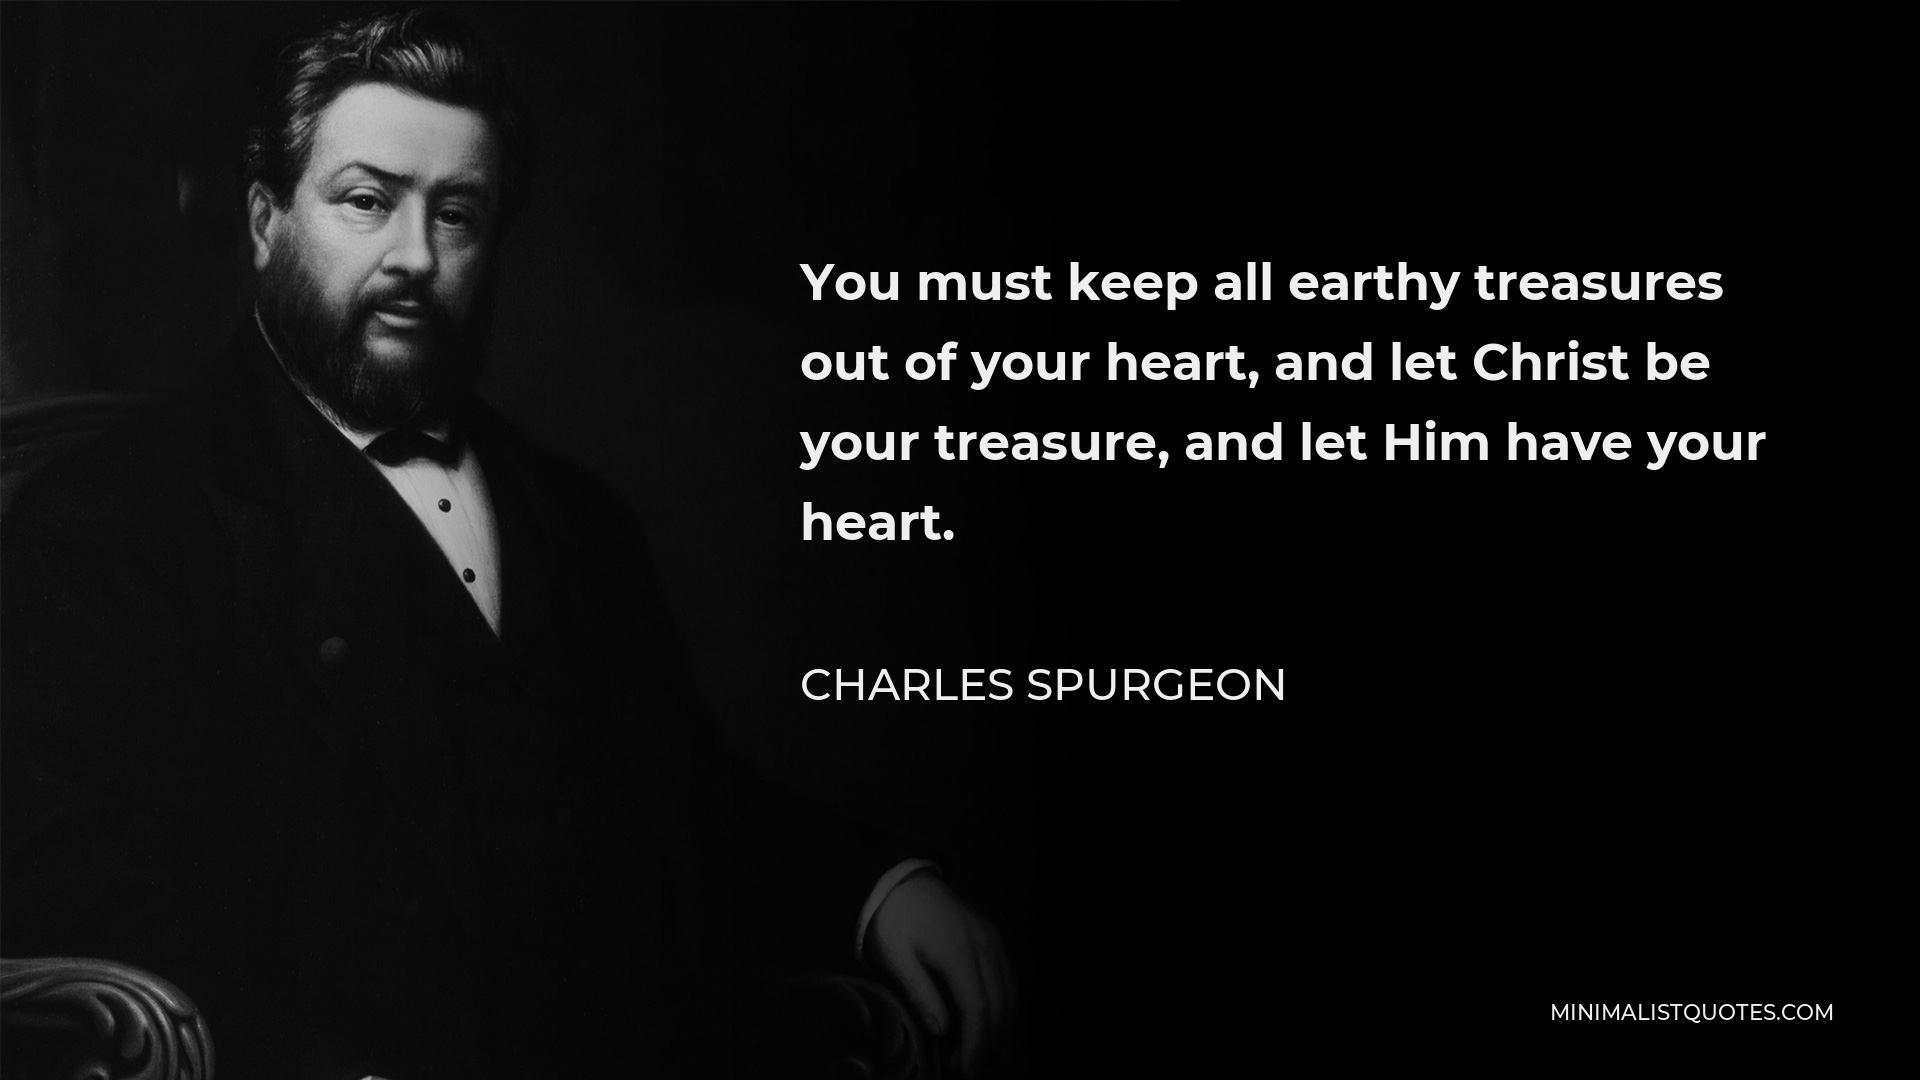 Charles Spurgeon Quote - You must keep all earthy treasures out of your heart, and let Christ be your treasure, and let Him have your heart.